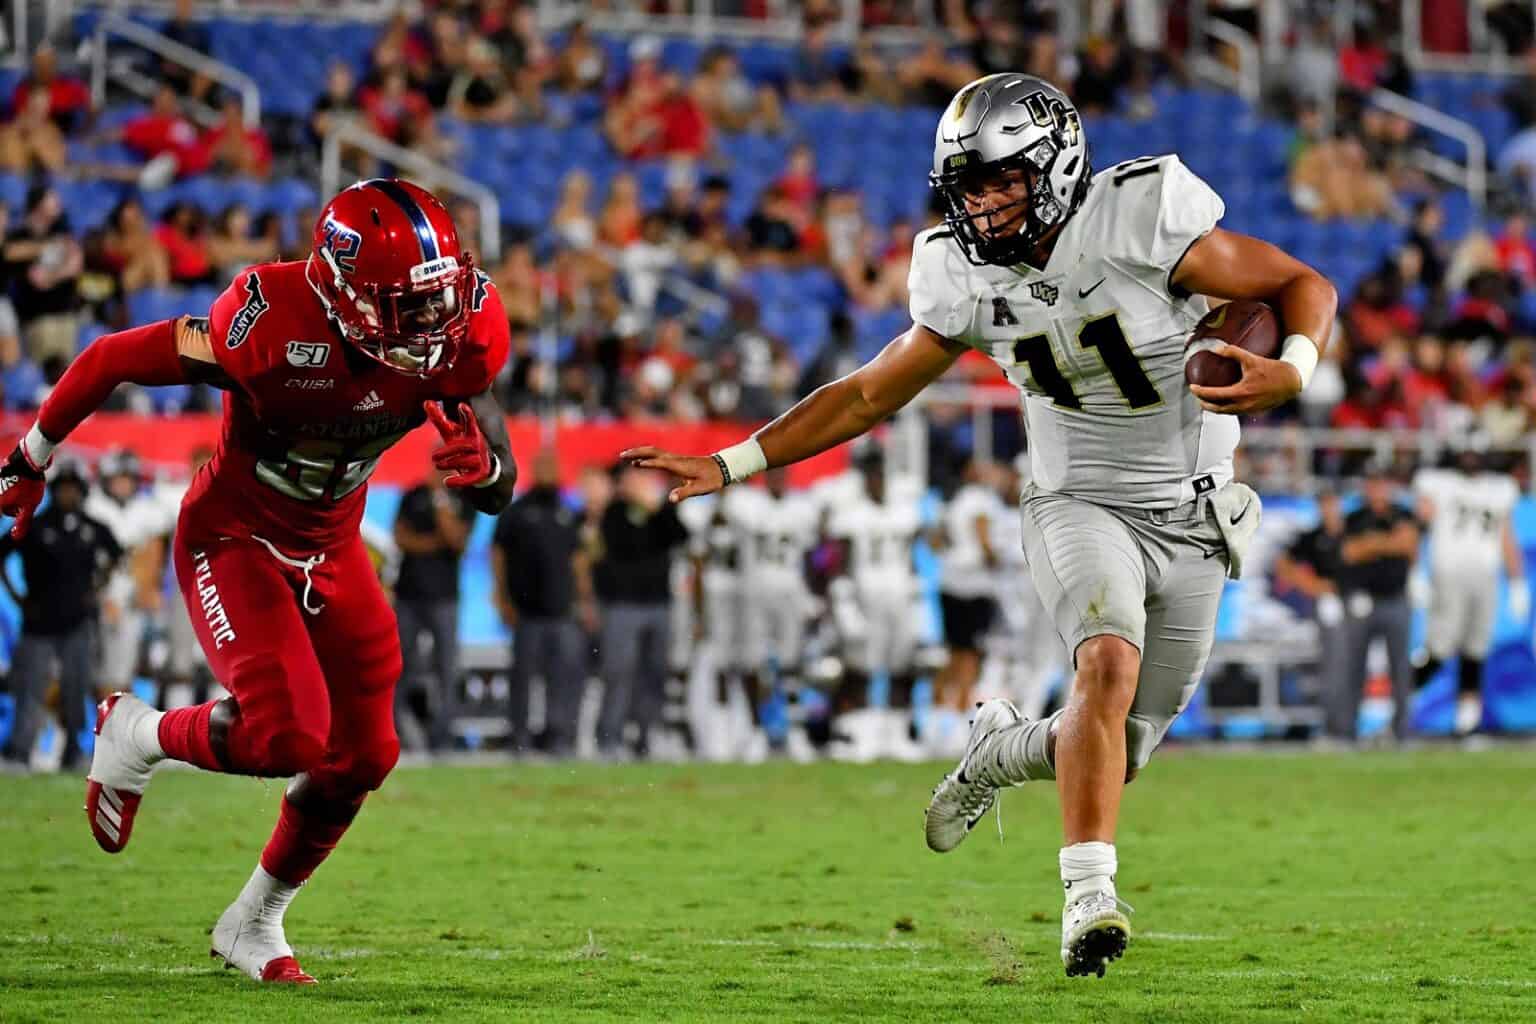 ucf-fau-schedule-home-and-home-football-series-for-2022-2025